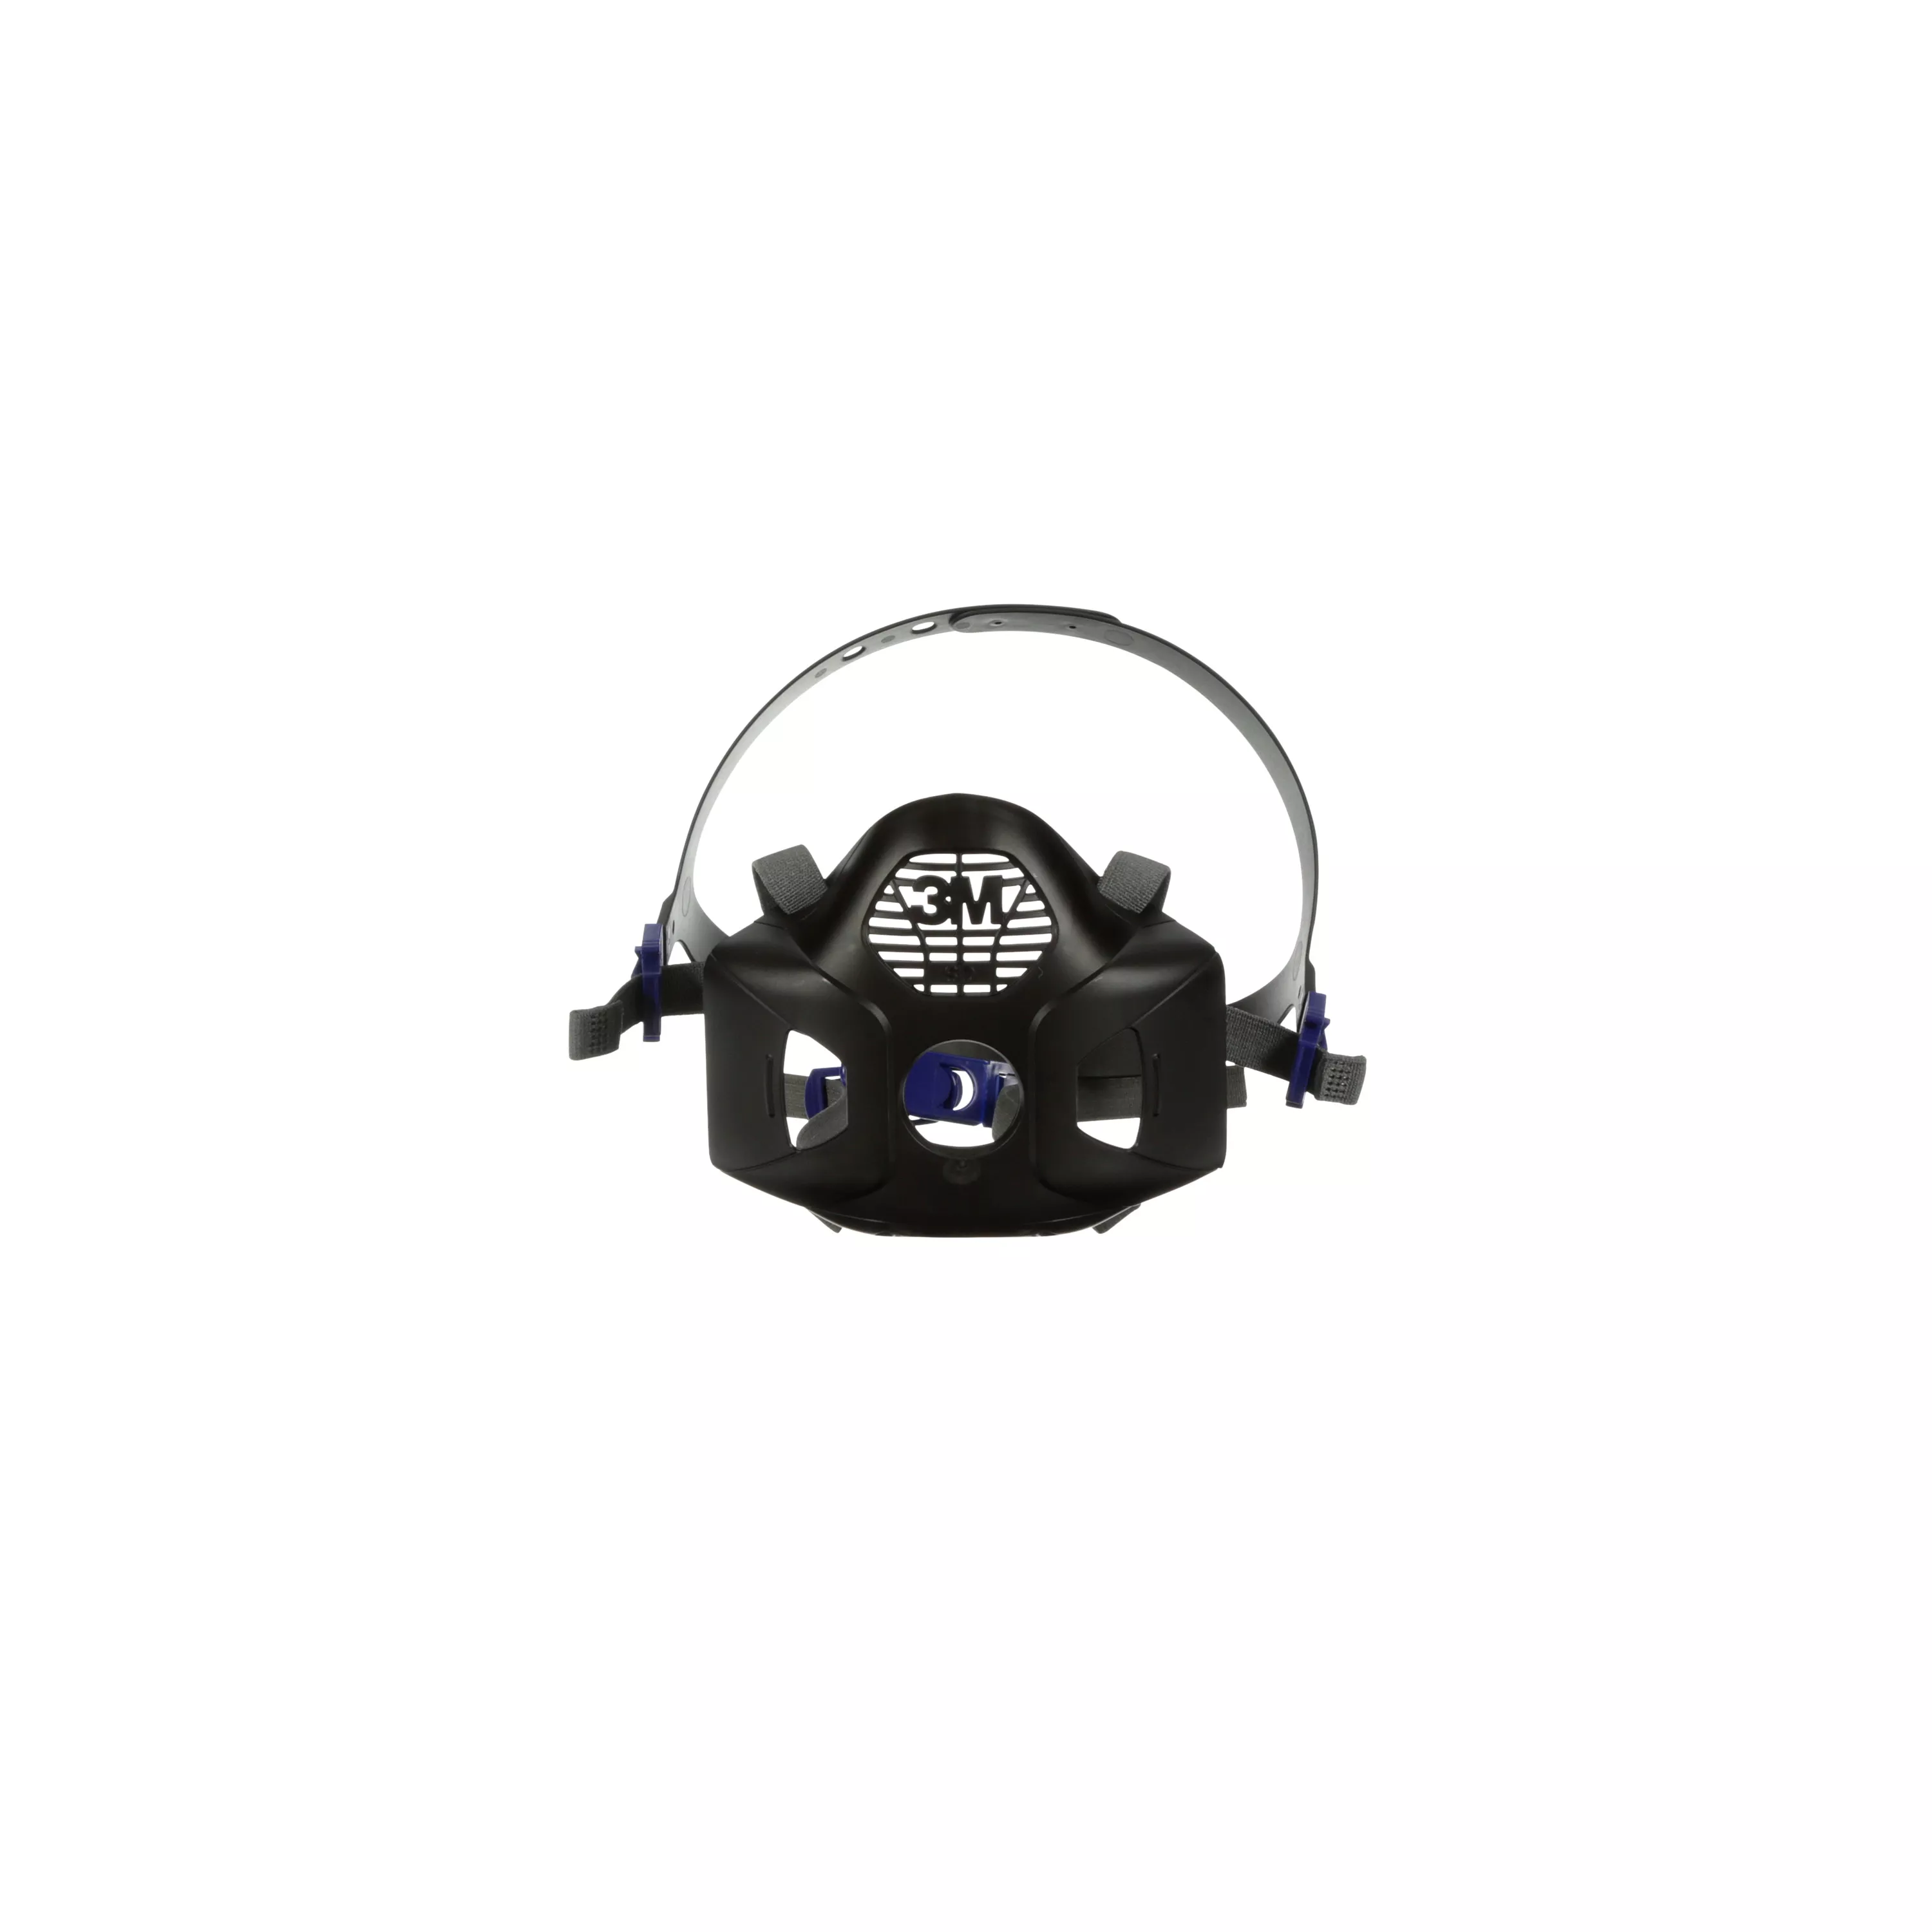 3M™ Secure Click™ Head Harness Assembly for HF-800 Series Respirators
with Speaking Diaphragm, HF-800-04, 5 EA/Case